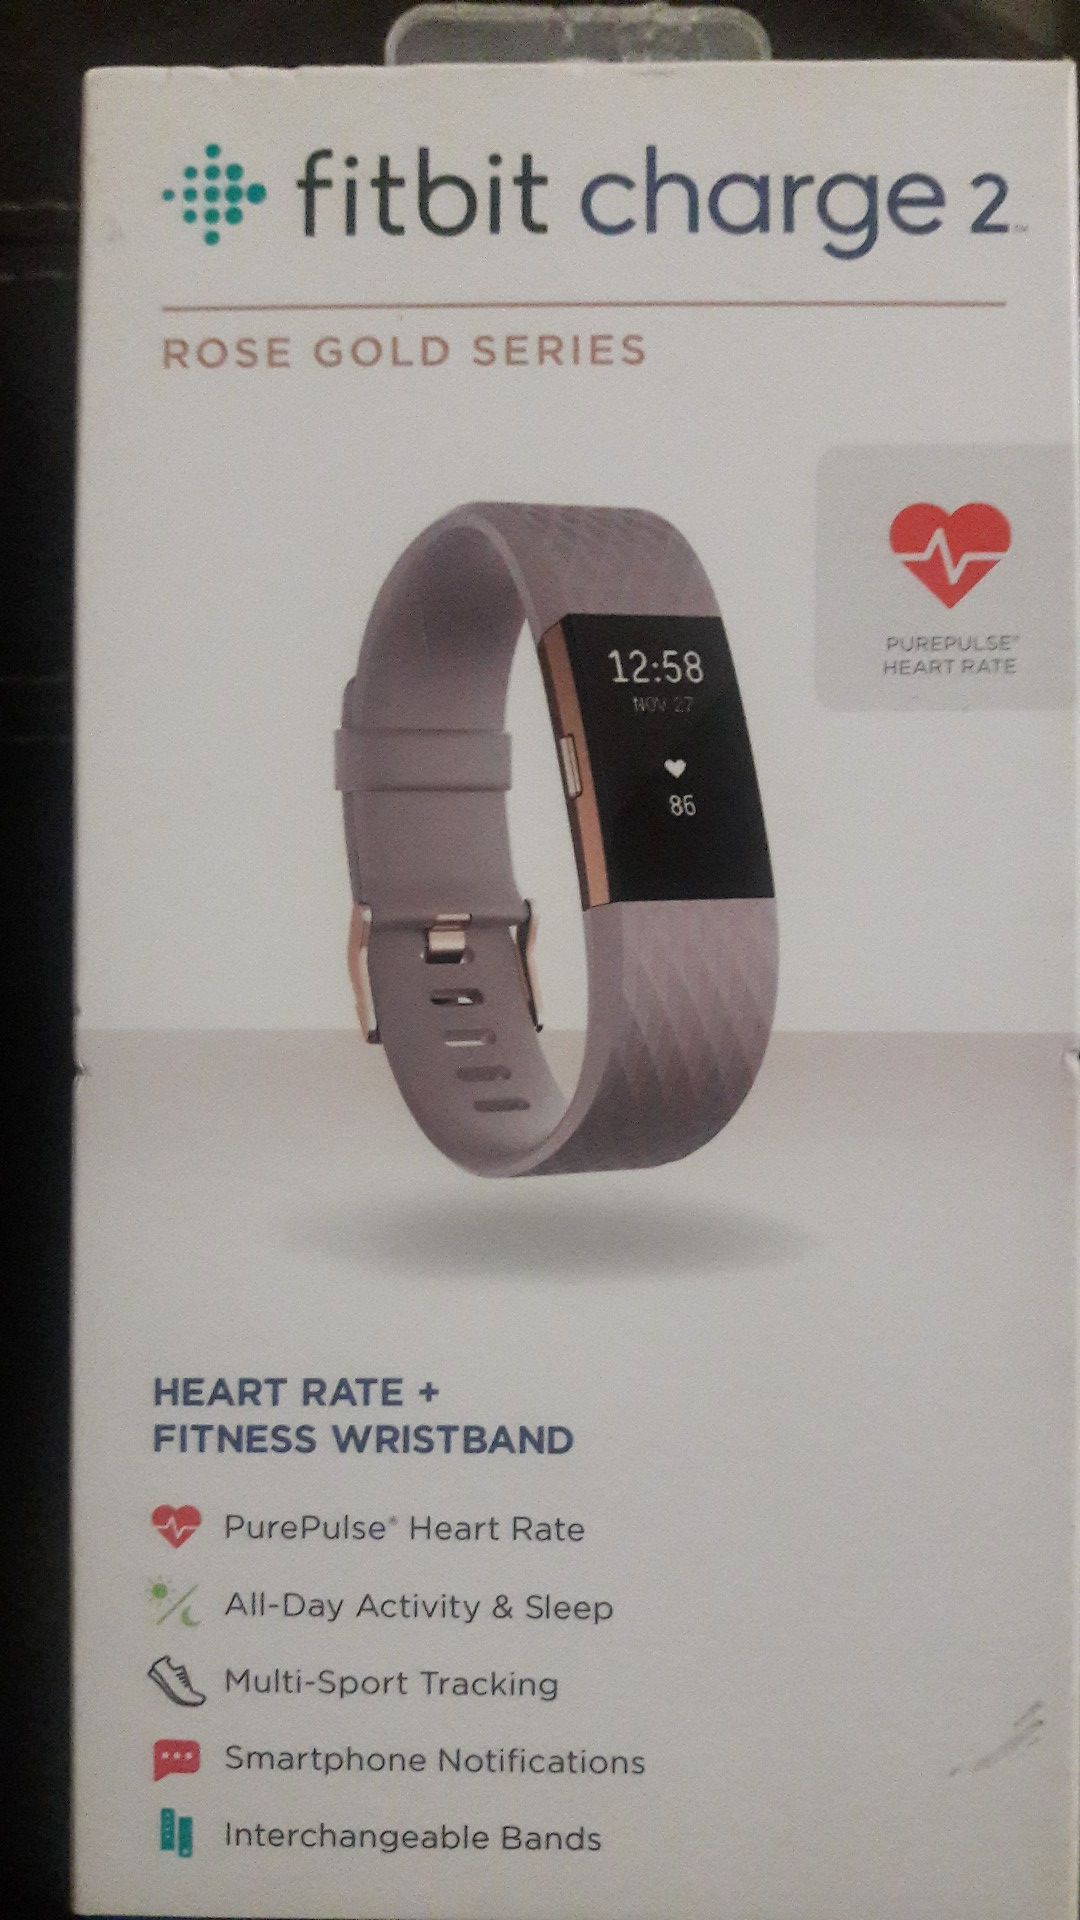 Fitbit charge 2 rose gold series